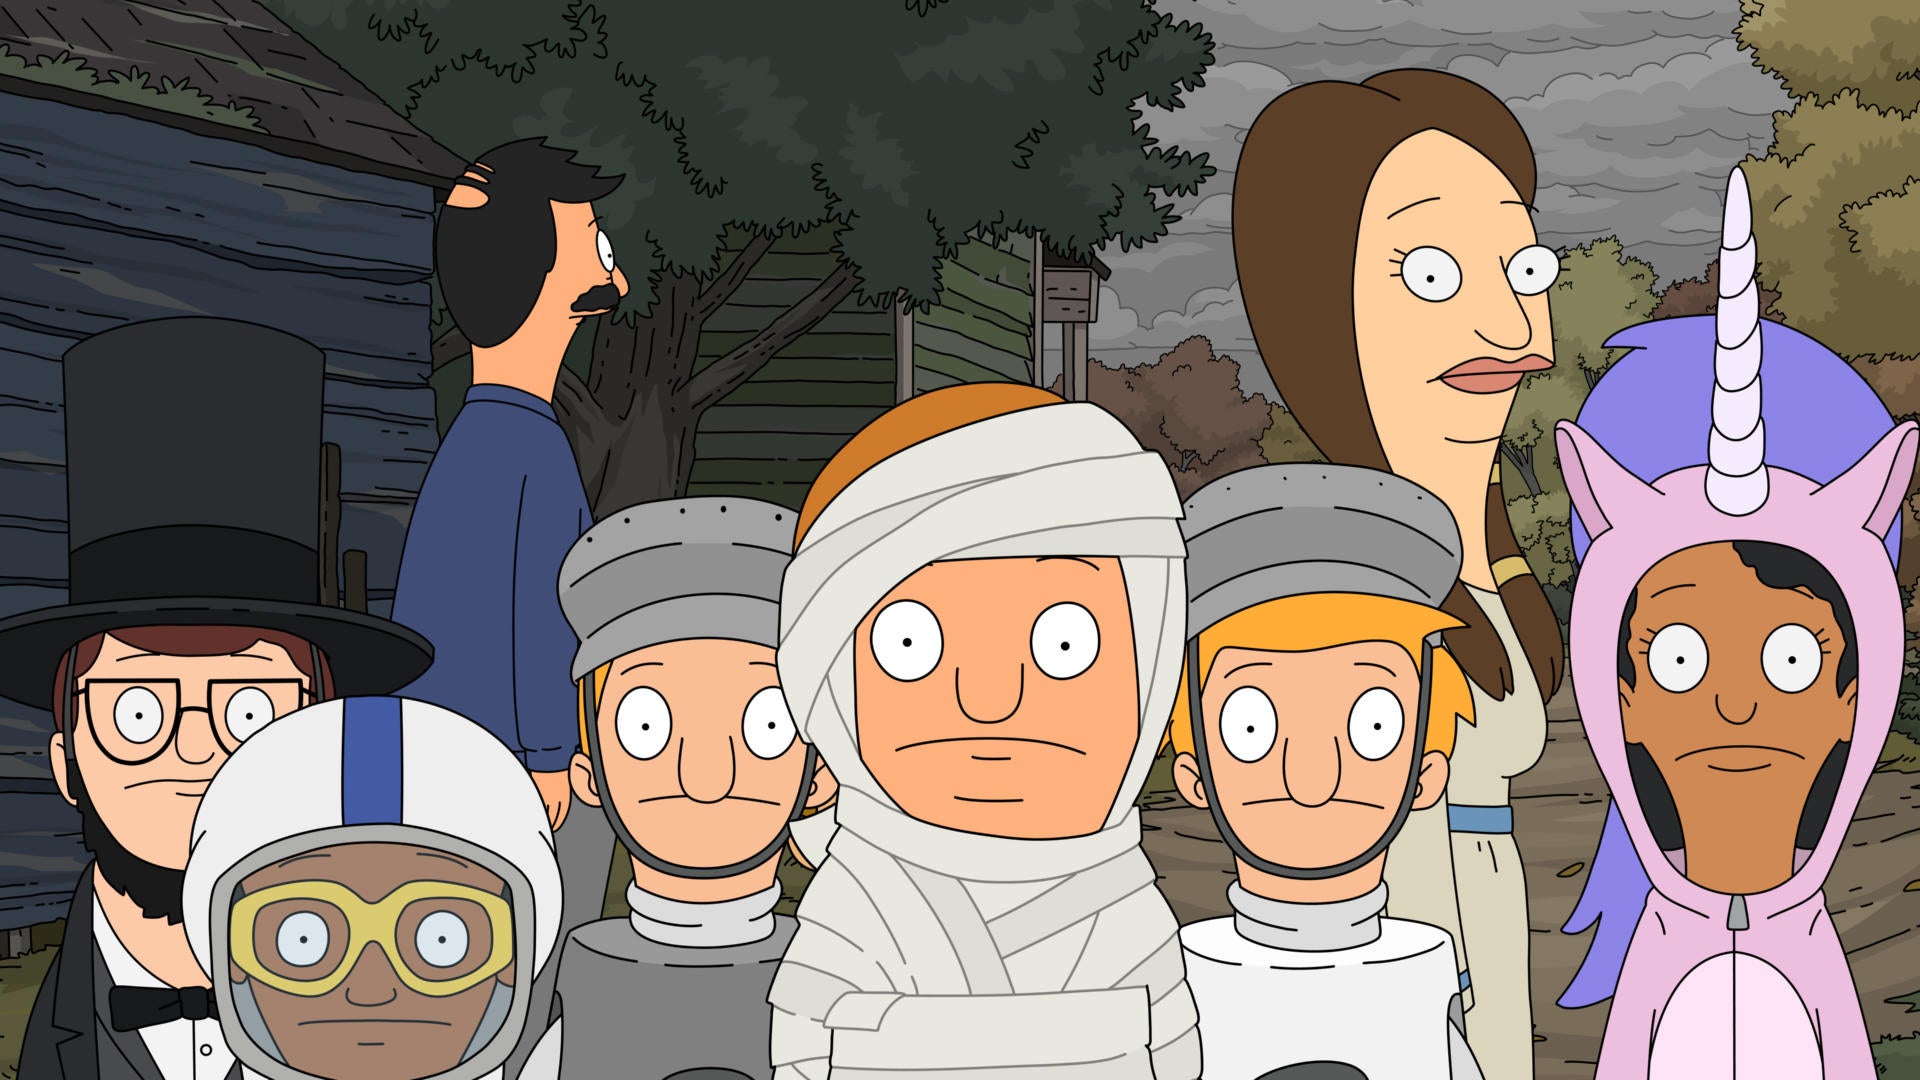 Bob's Burgers Season 11, Episode 4 Review – Ghost Autopsy at Hotel  Horror-fornia and a Long Blood Night for Bob